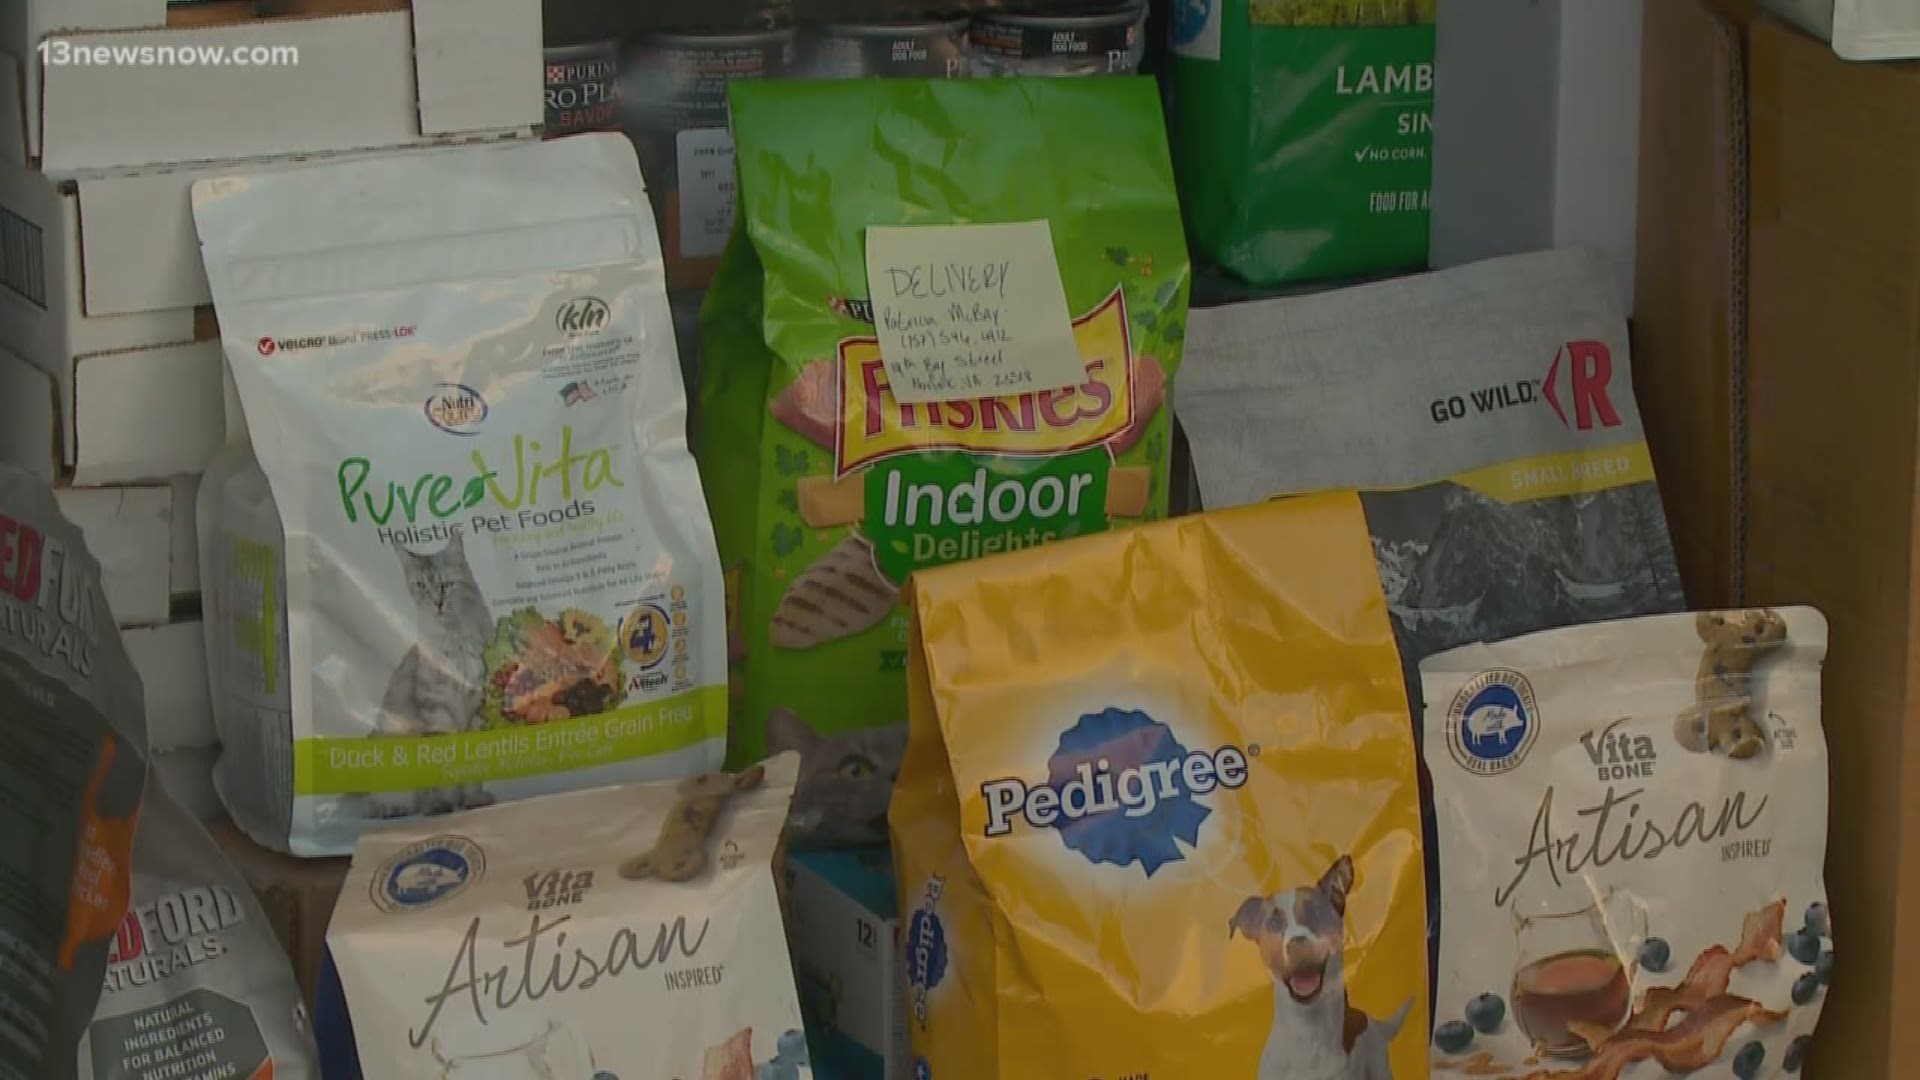 13News Now Madison Kimbro stopped by the Norfolk SPCA to take a look at their Emergency Pet Pantry that gives pet food to families in need.